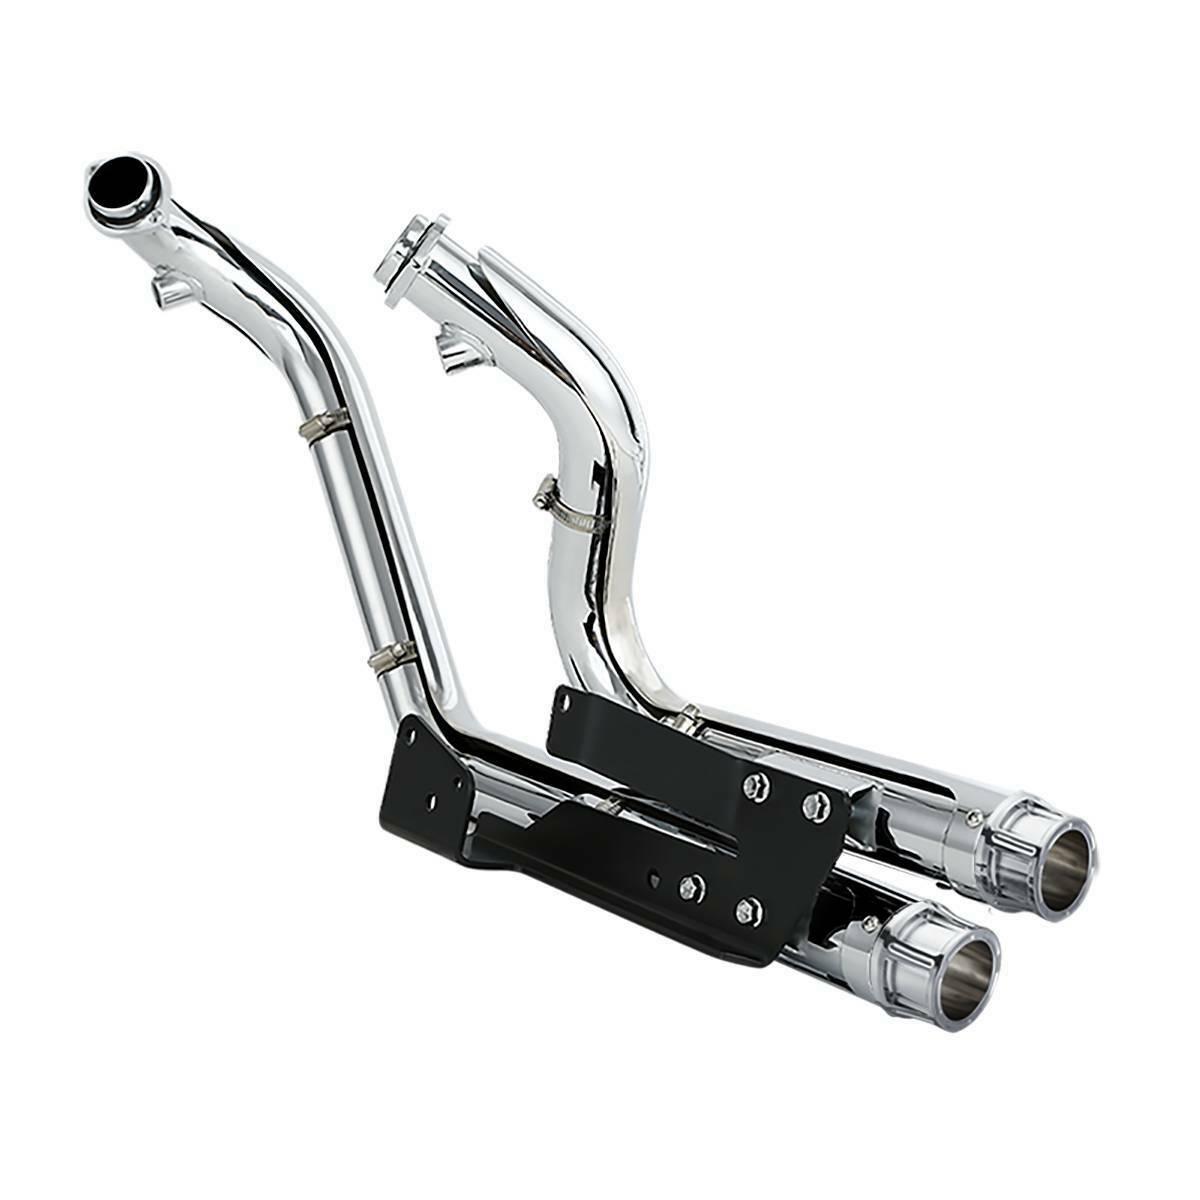 Dual Pipes Muffler Exhaust Fit For Harley Sportster Iron XL883 XL1200 2004-2013 - Moto Life Products